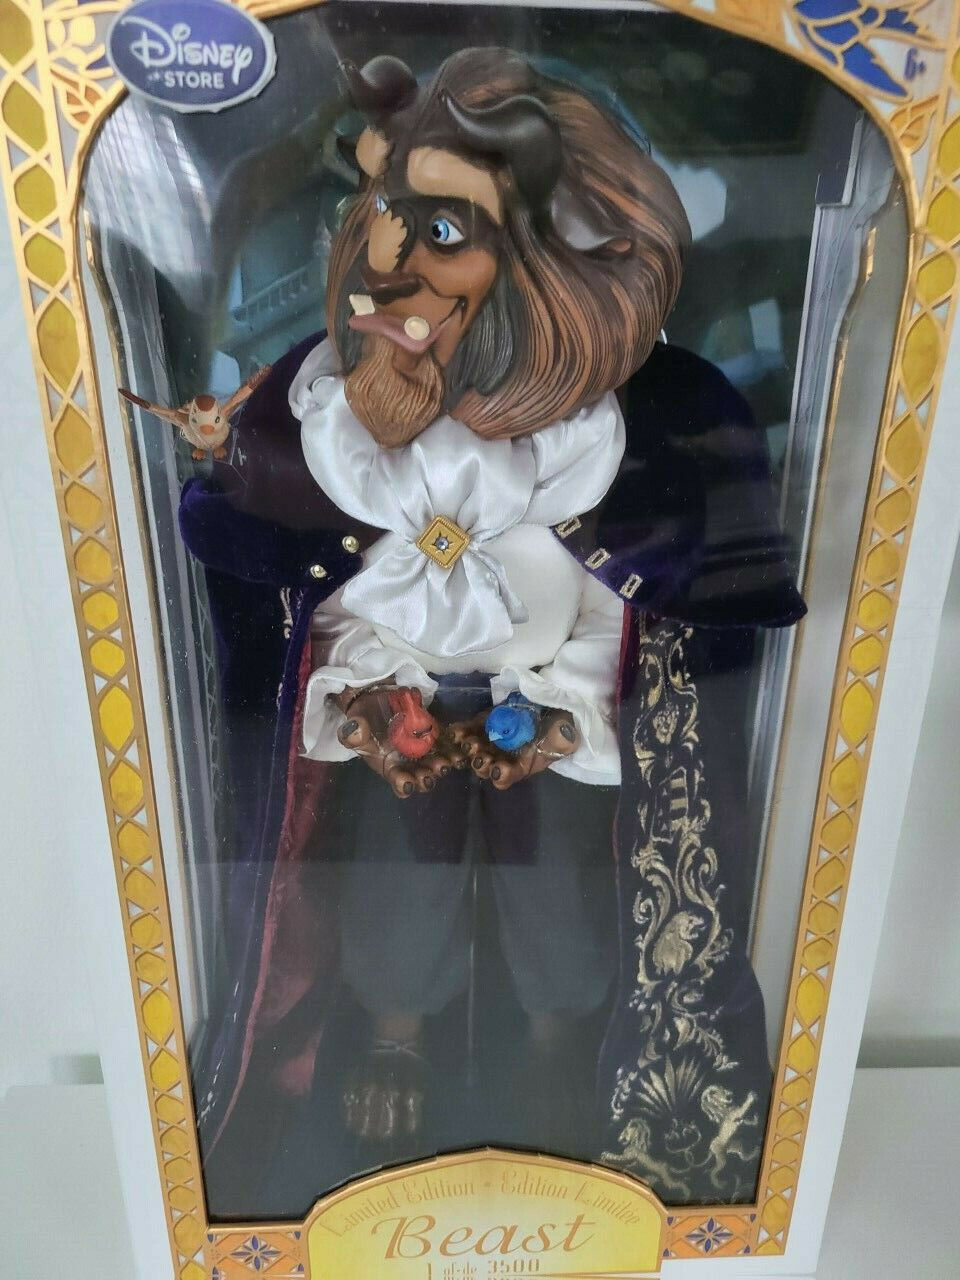 NewDisney Limited Edition ~BEAST~ from beauty and the beast 1of 3500~rare